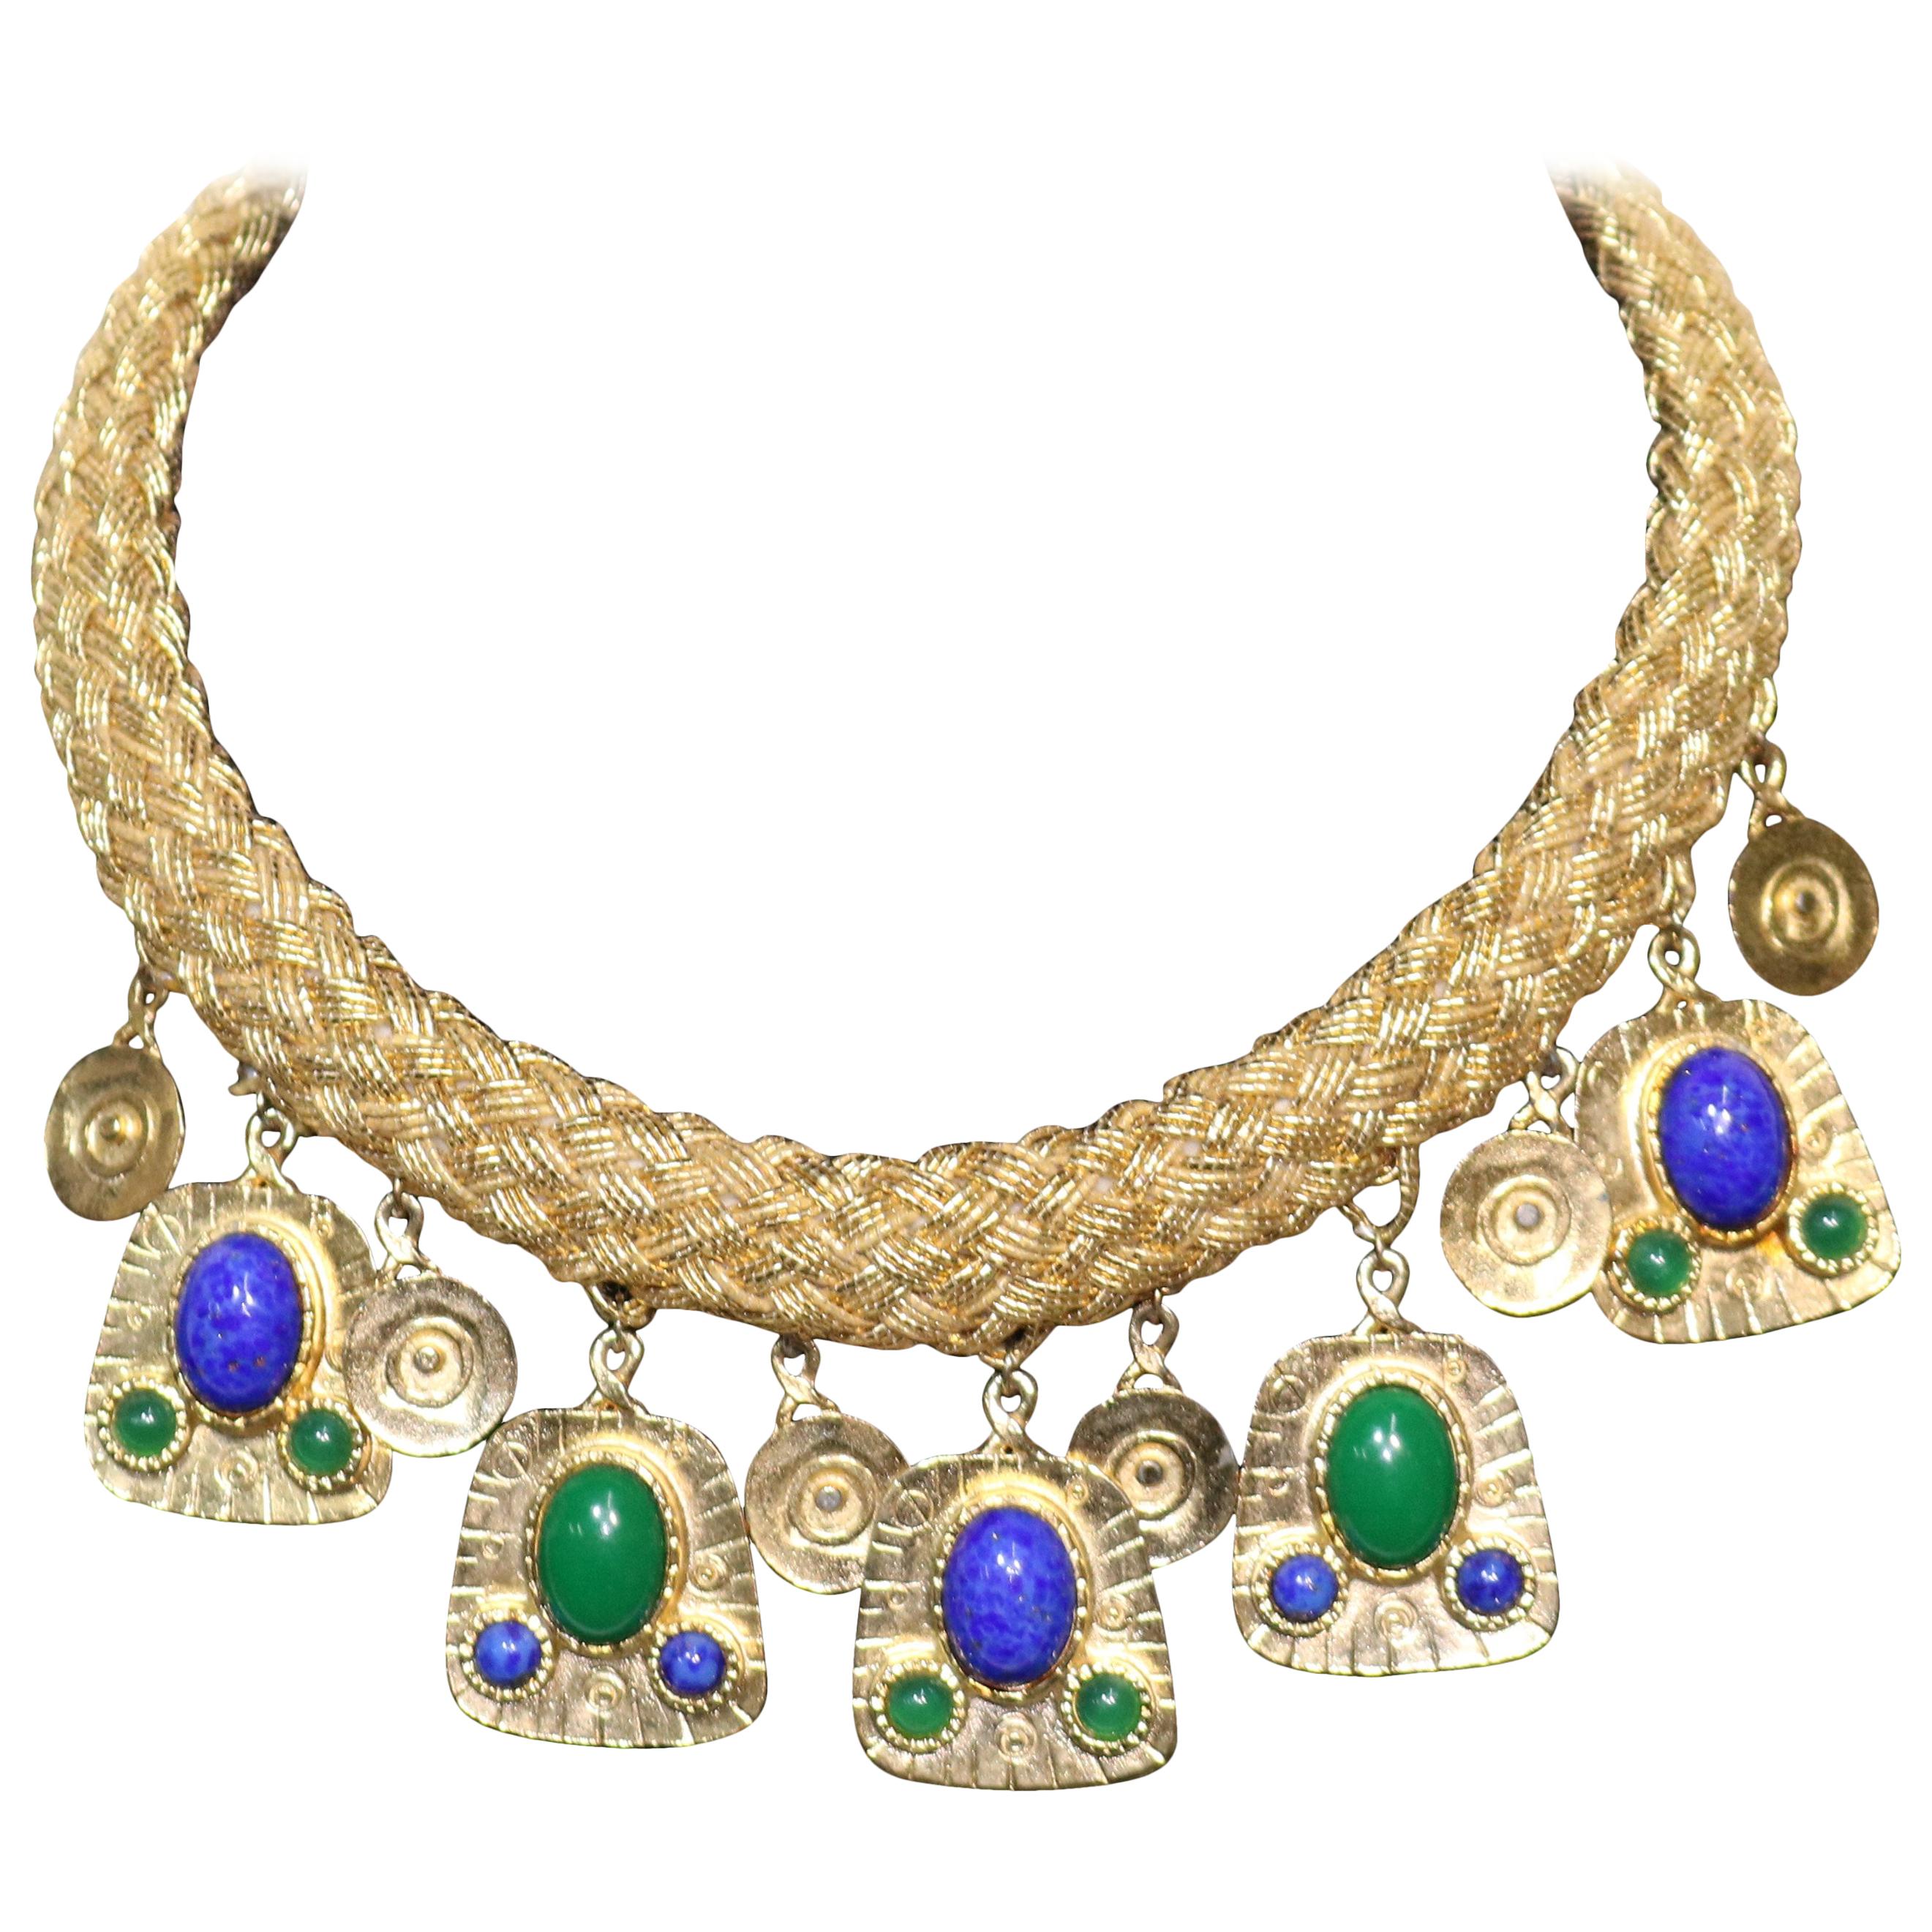 Gold Woven 'Cleopatra' Collar Necklace-Malachite and Lapis Drops For Sale